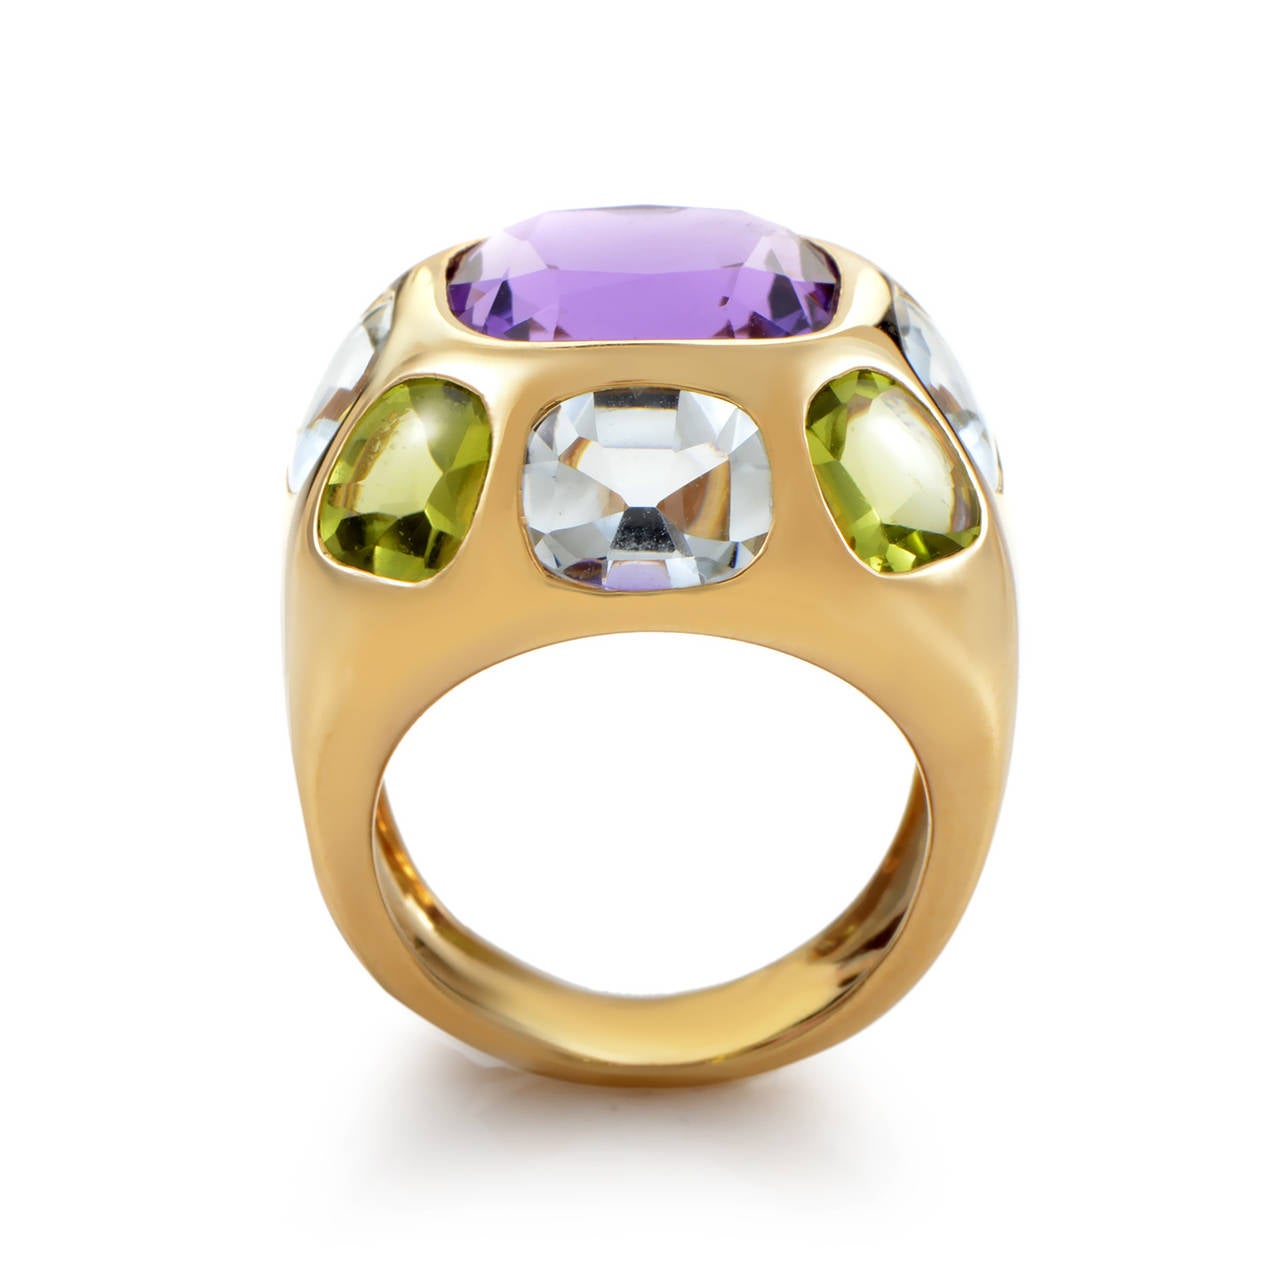 Flawlessly forged 18K yellow gold presents a worthy platform for multiple stones. Amethyst, aquamarine, and peridot make bold statements at the crest of this ring's smooth taper.

Included Items: Manufacturer's Box
Ring Size: 6.25 (52 1/8)